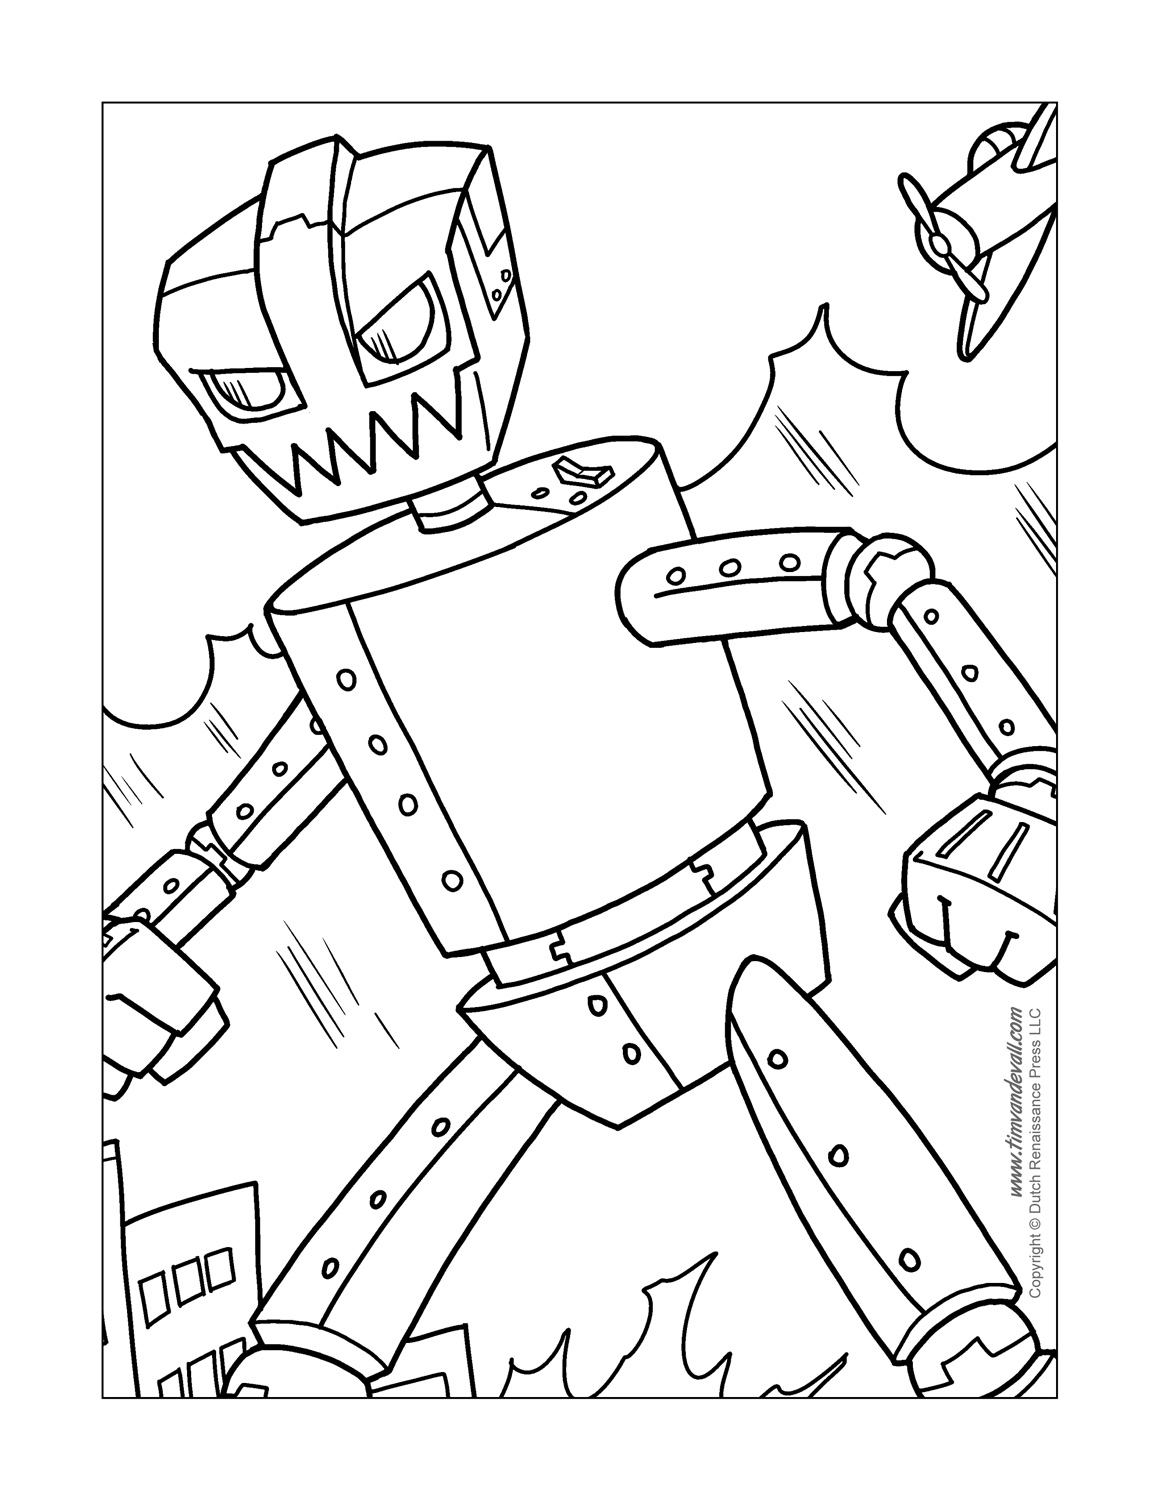 Printable robot coloring pages coloring pages for kids â tims printables